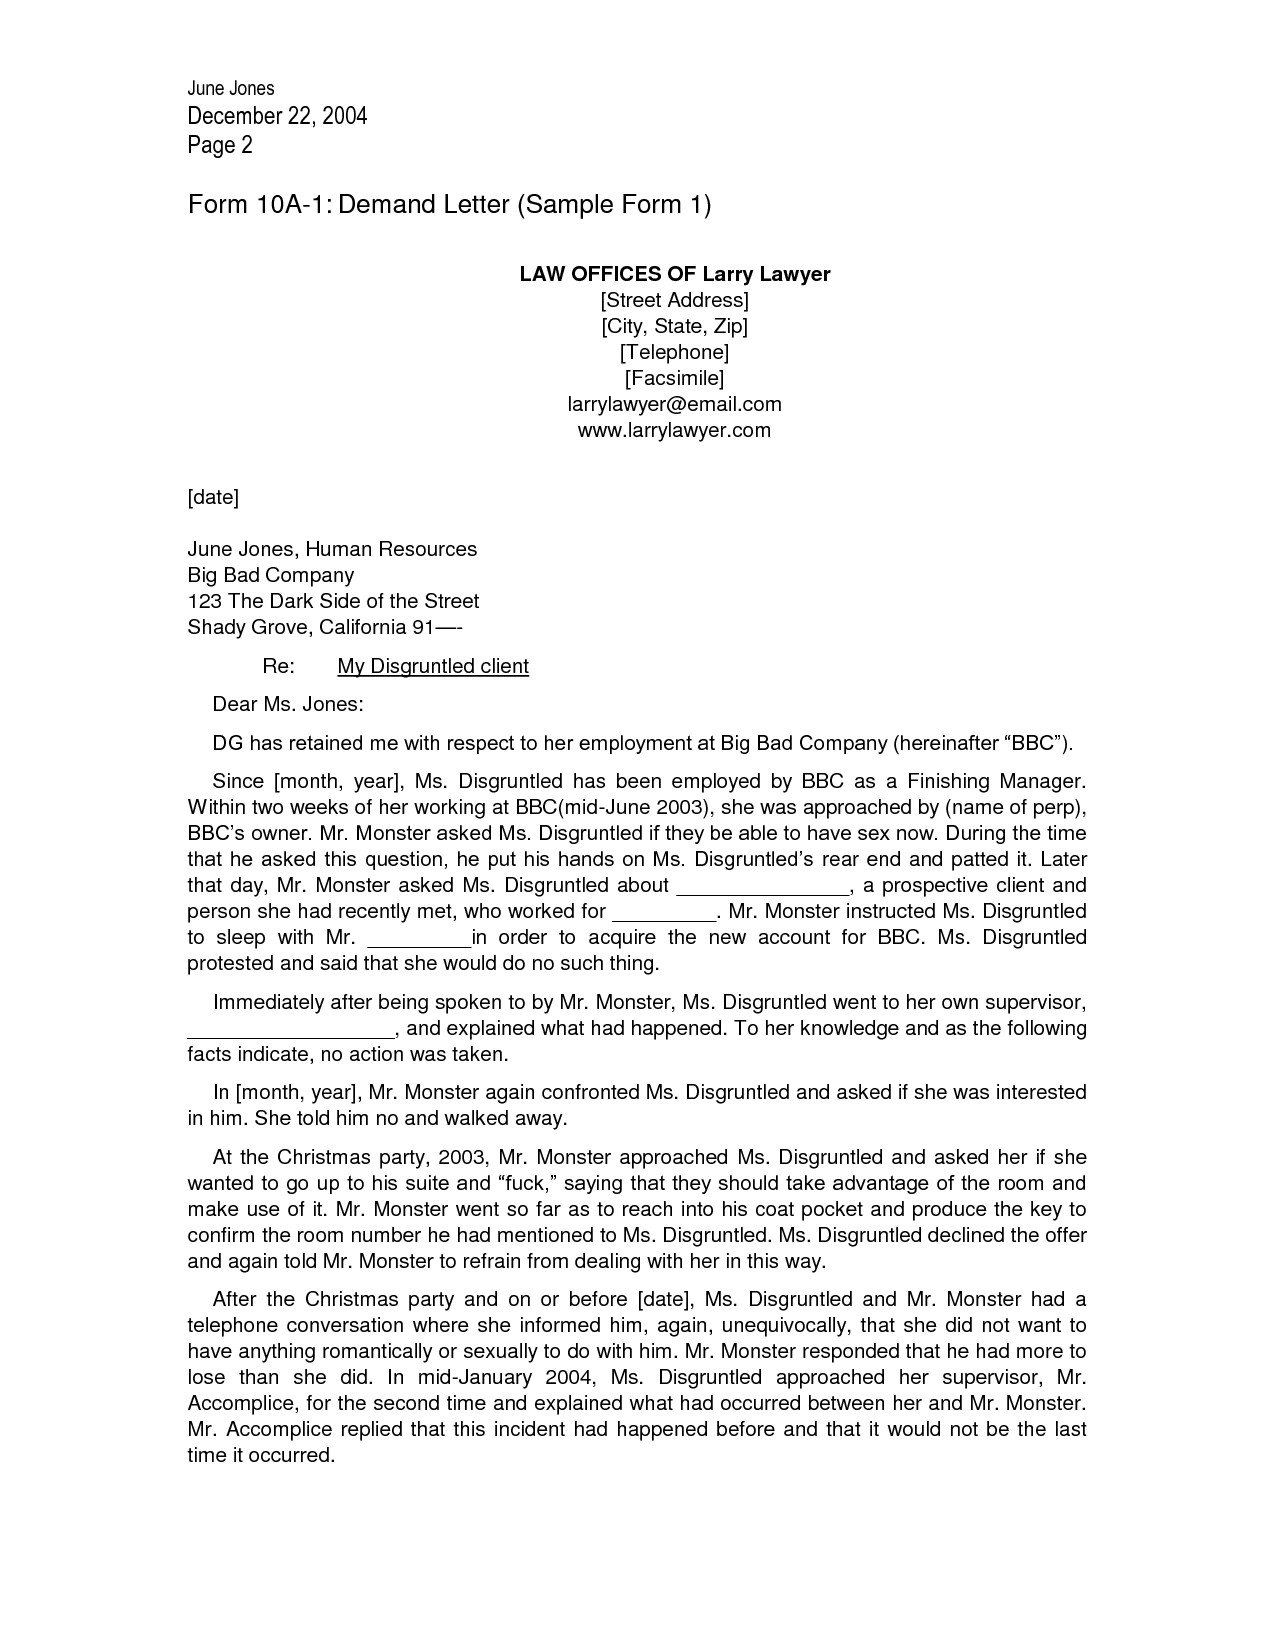 Demand Letter Template for Money Owed - Demand Letter Template for Personal Injury